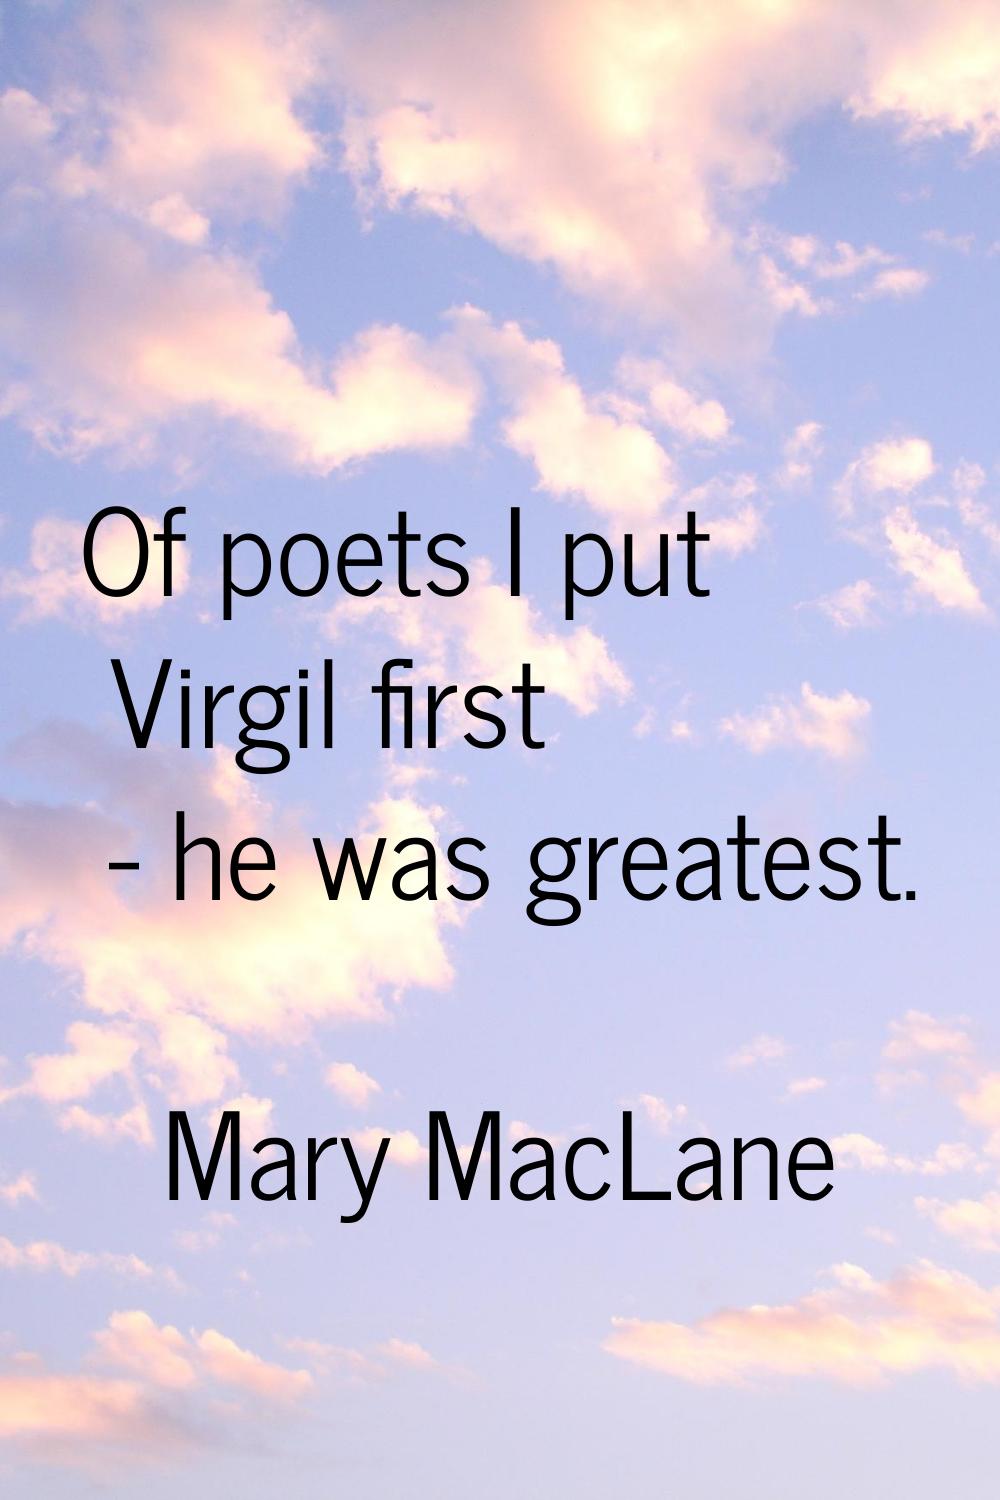 Of poets I put Virgil first - he was greatest.